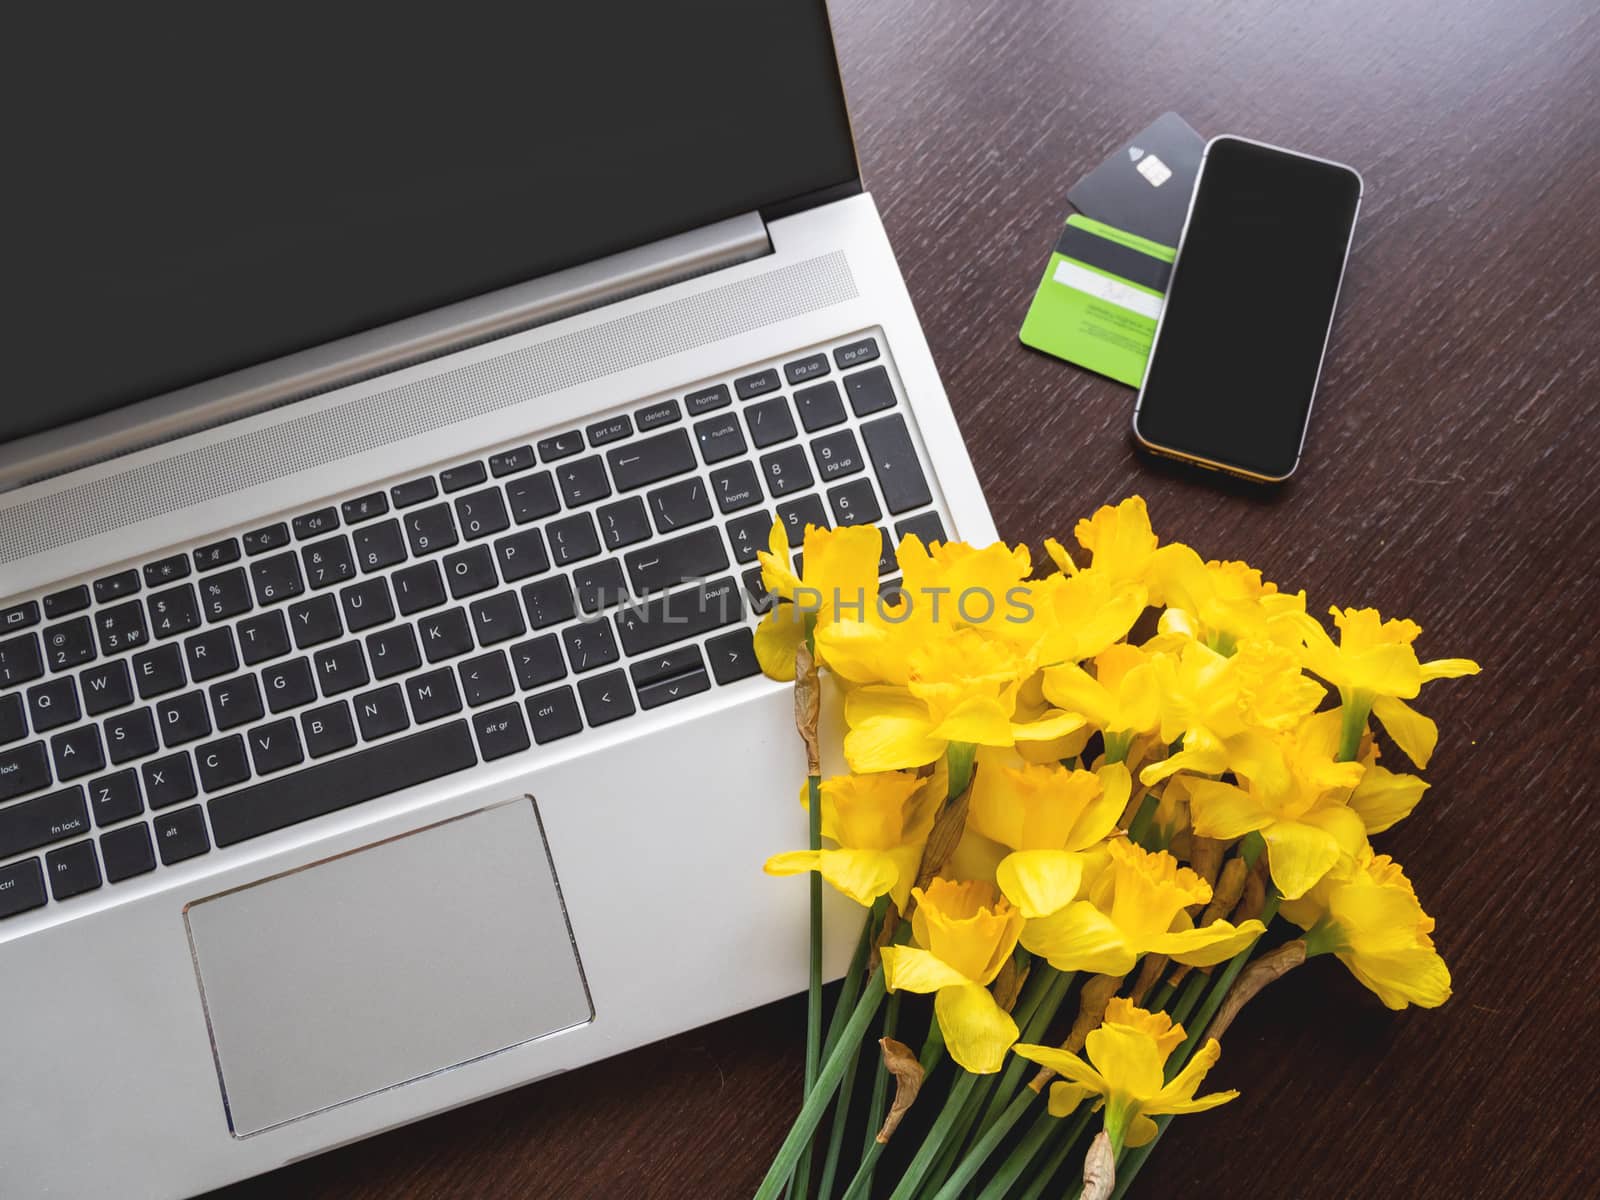 Bouquet of Narcissus or daffodils lying on silver metal laptop. Top view on bright yellow flowers on portable device and smartphone with credit cards on wooden table.